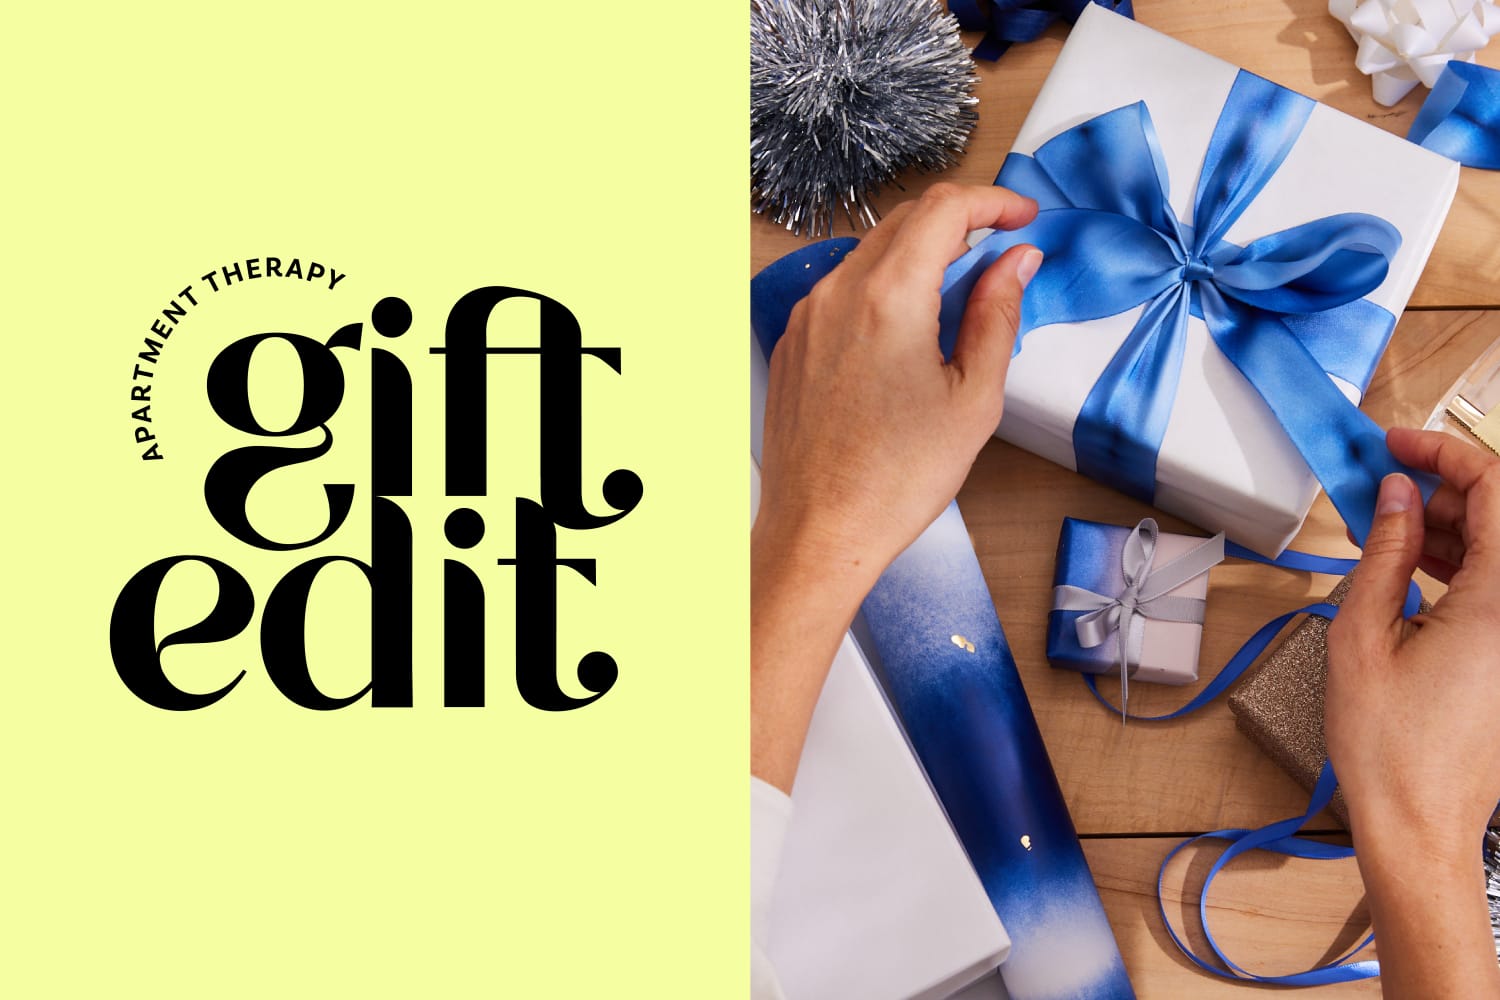 45 Best Gift Ideas for Employees 2023